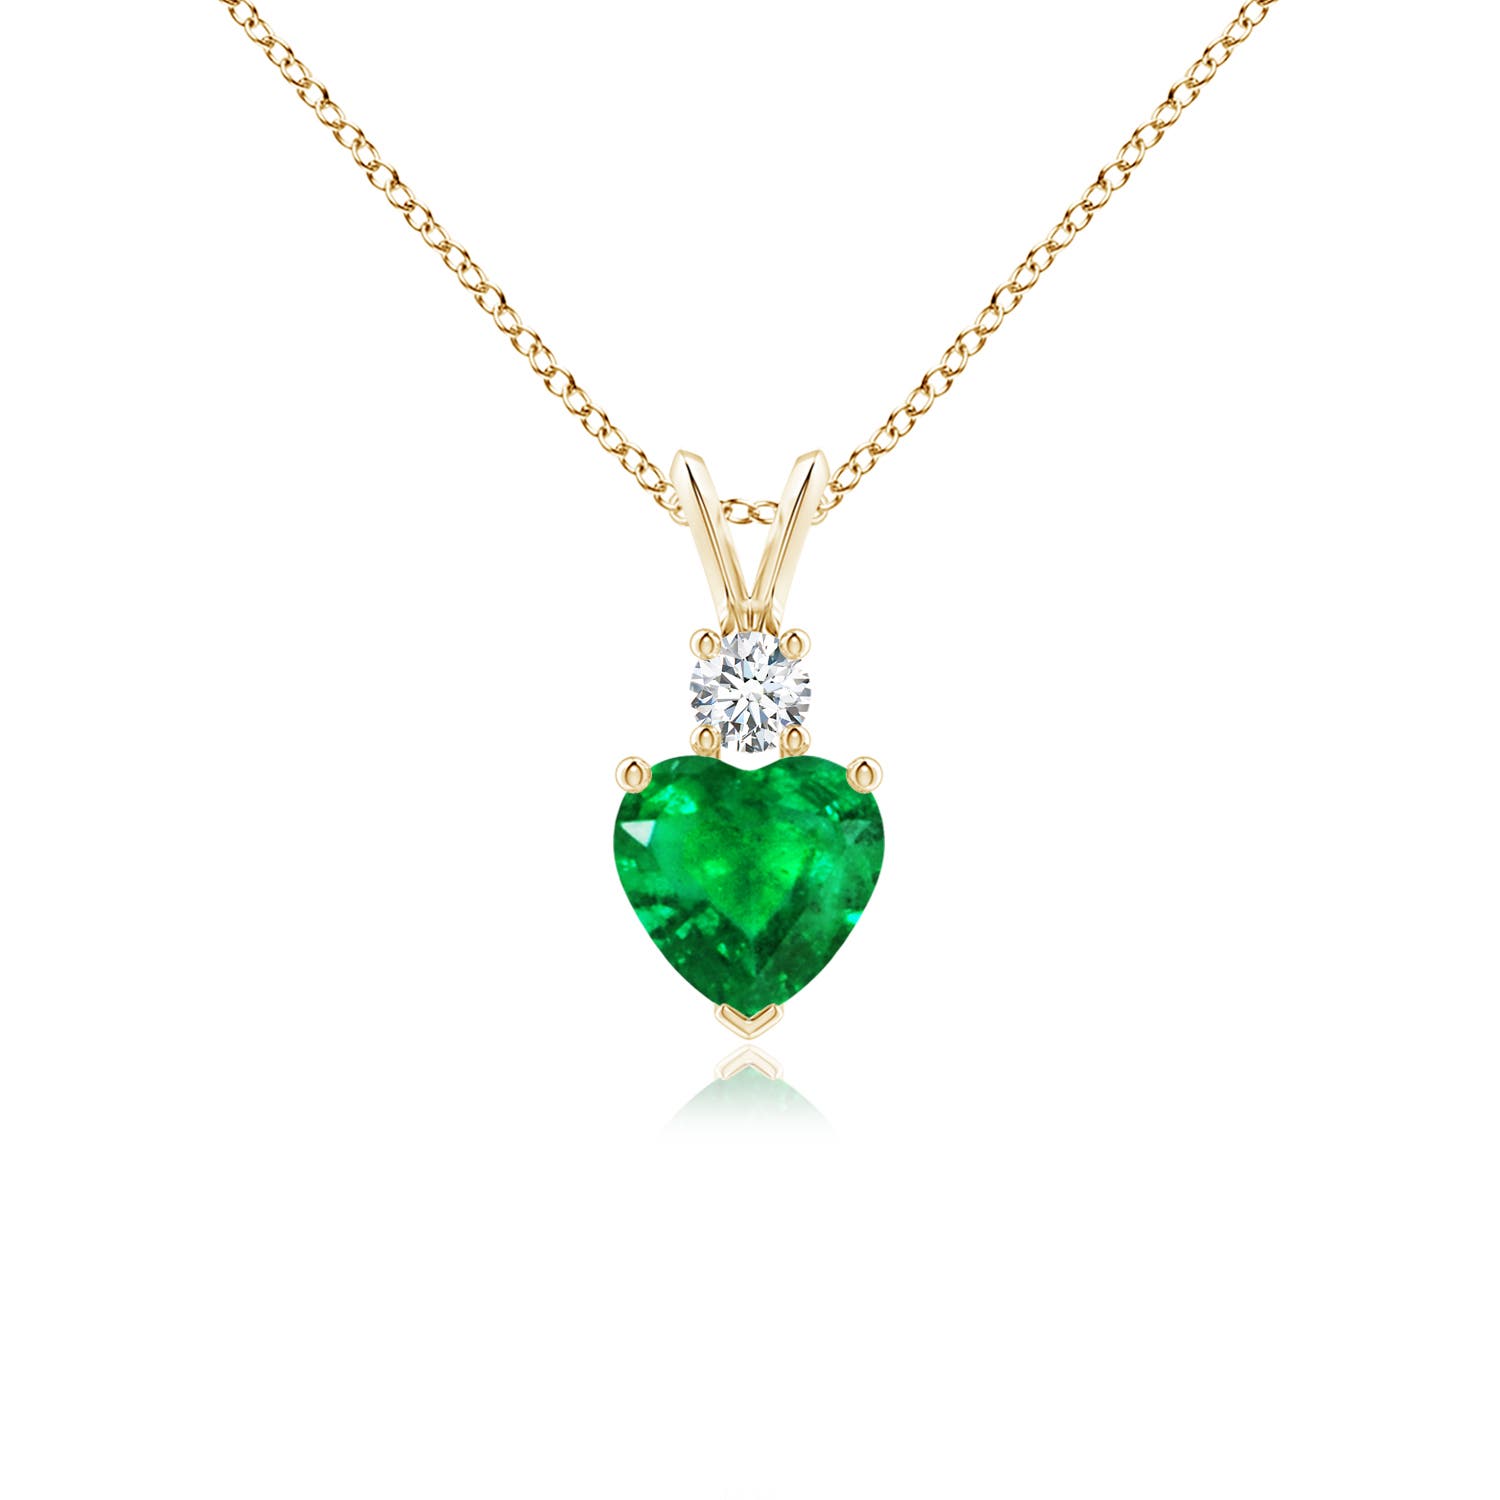 AAA - Emerald / 0.68 CT / 14 KT Yellow Gold